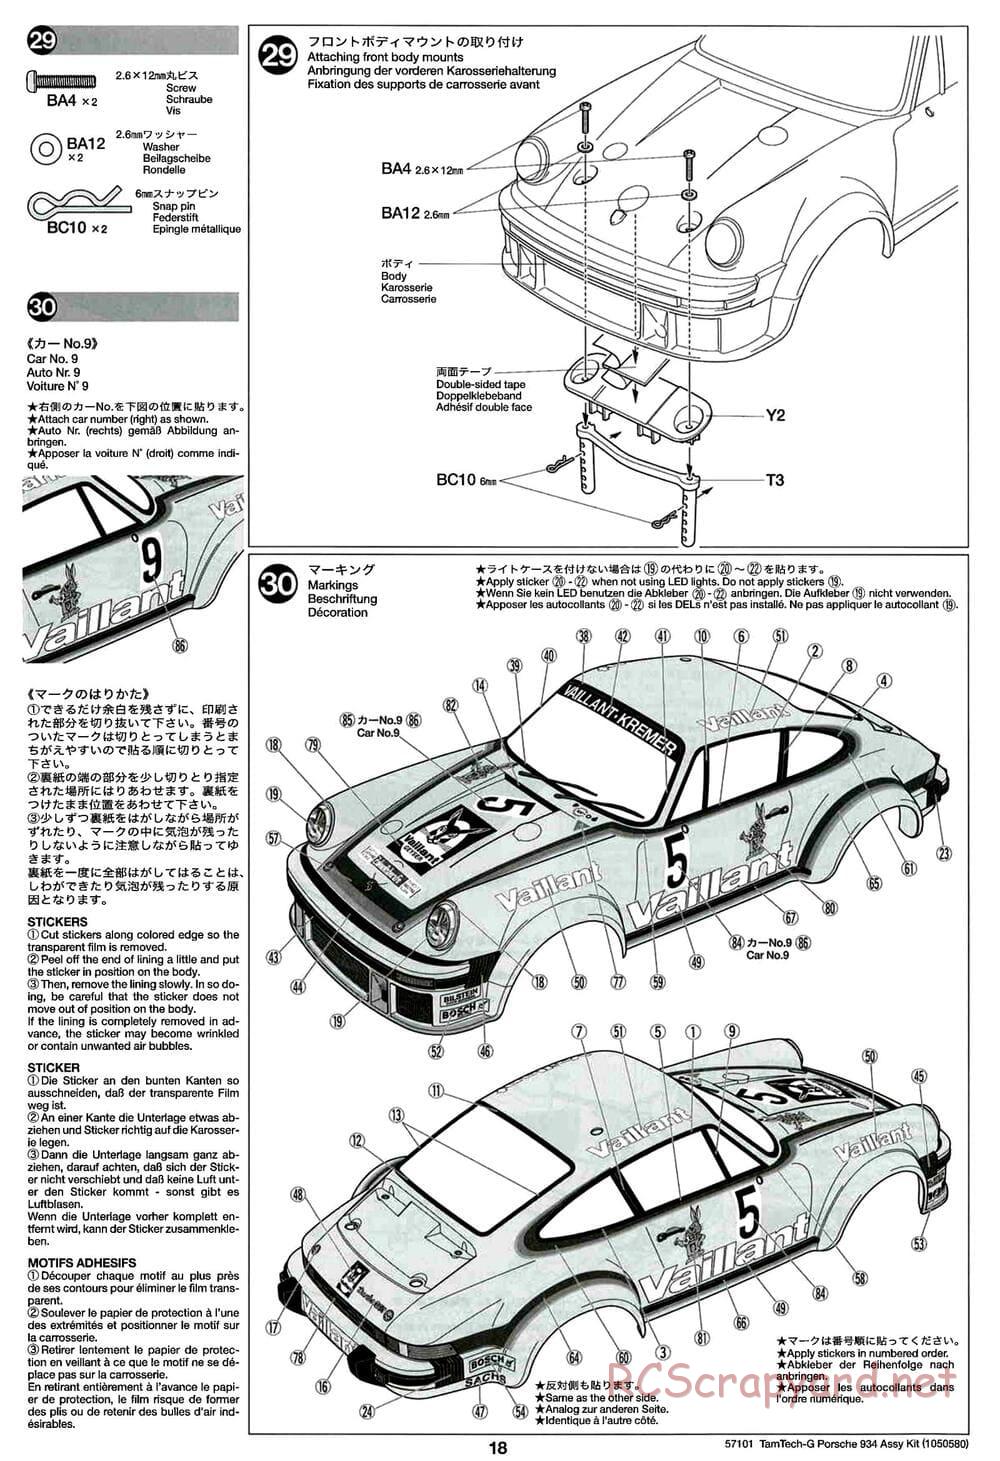 Tamiya - Porsche Turbo RSR - GT-01 Chassis - Manual - Page 18